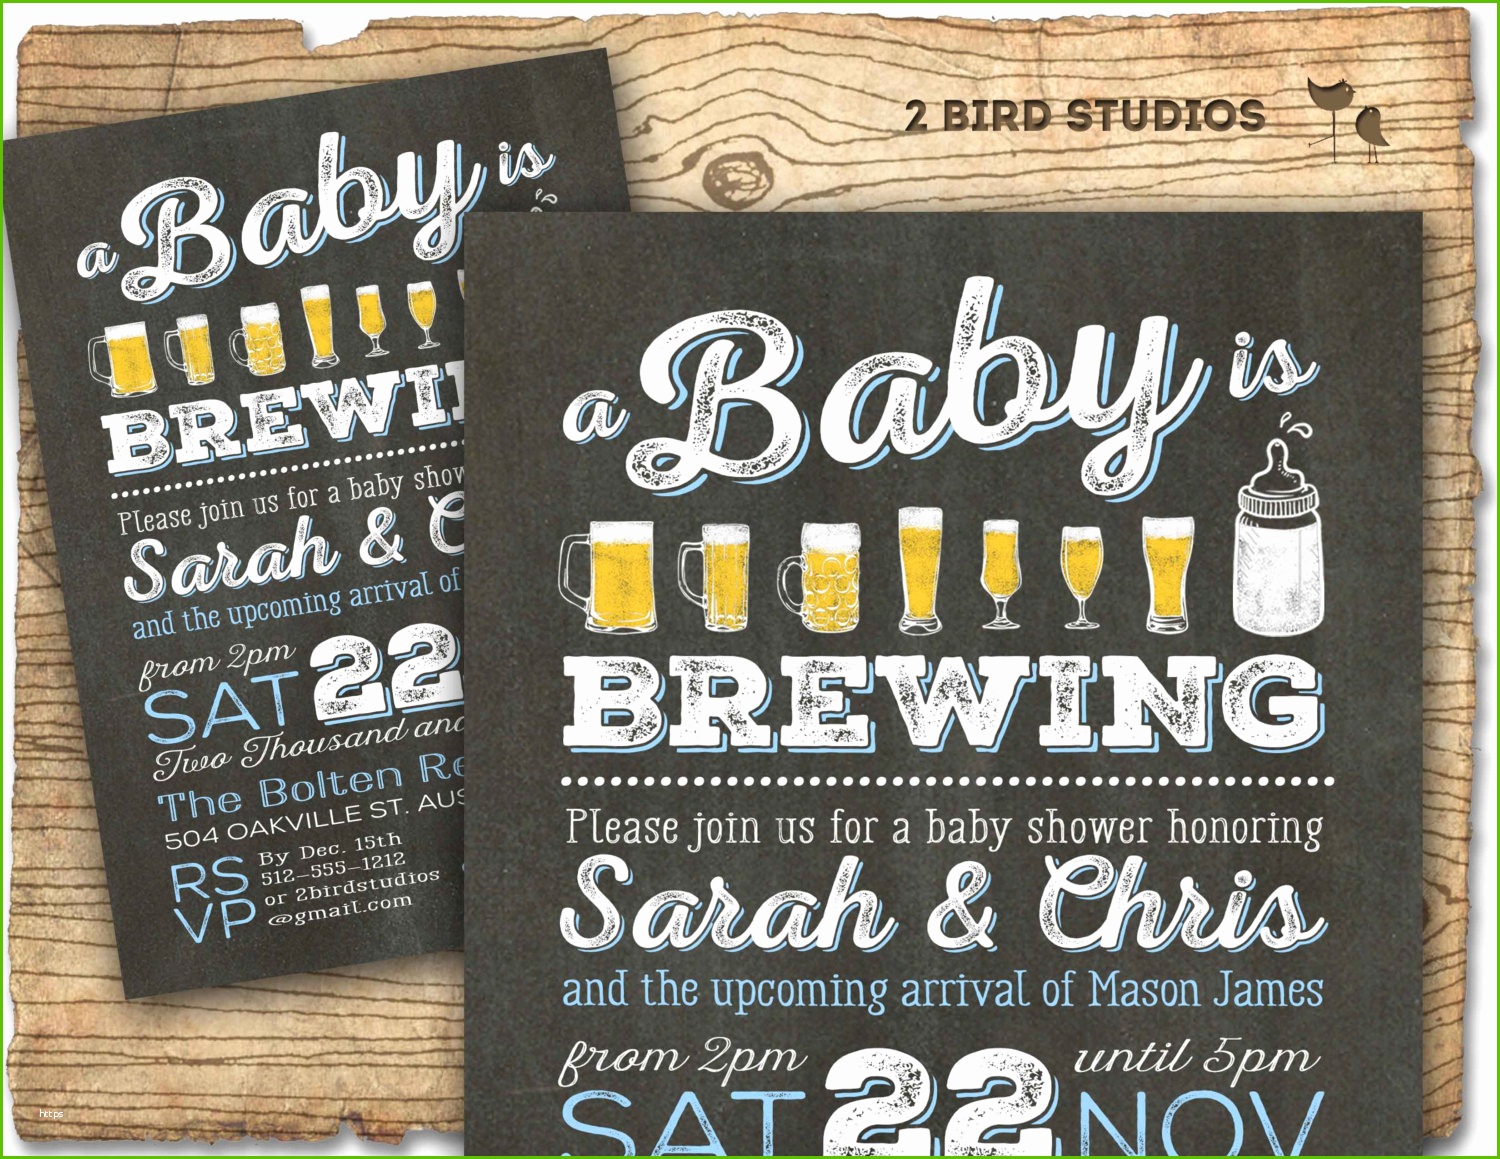 Full Size of Baby Shower:precious Coed Baby Shower Picture Designs Coed Baby Shower Baby Shower Tableware Baby Shower De Baby Shower Napkins Baby Shower Ideas Baby Shower Cake Ideas Baby Yager Is A Coed Baby Shower Fabulous Bbq Beer Baby Shower